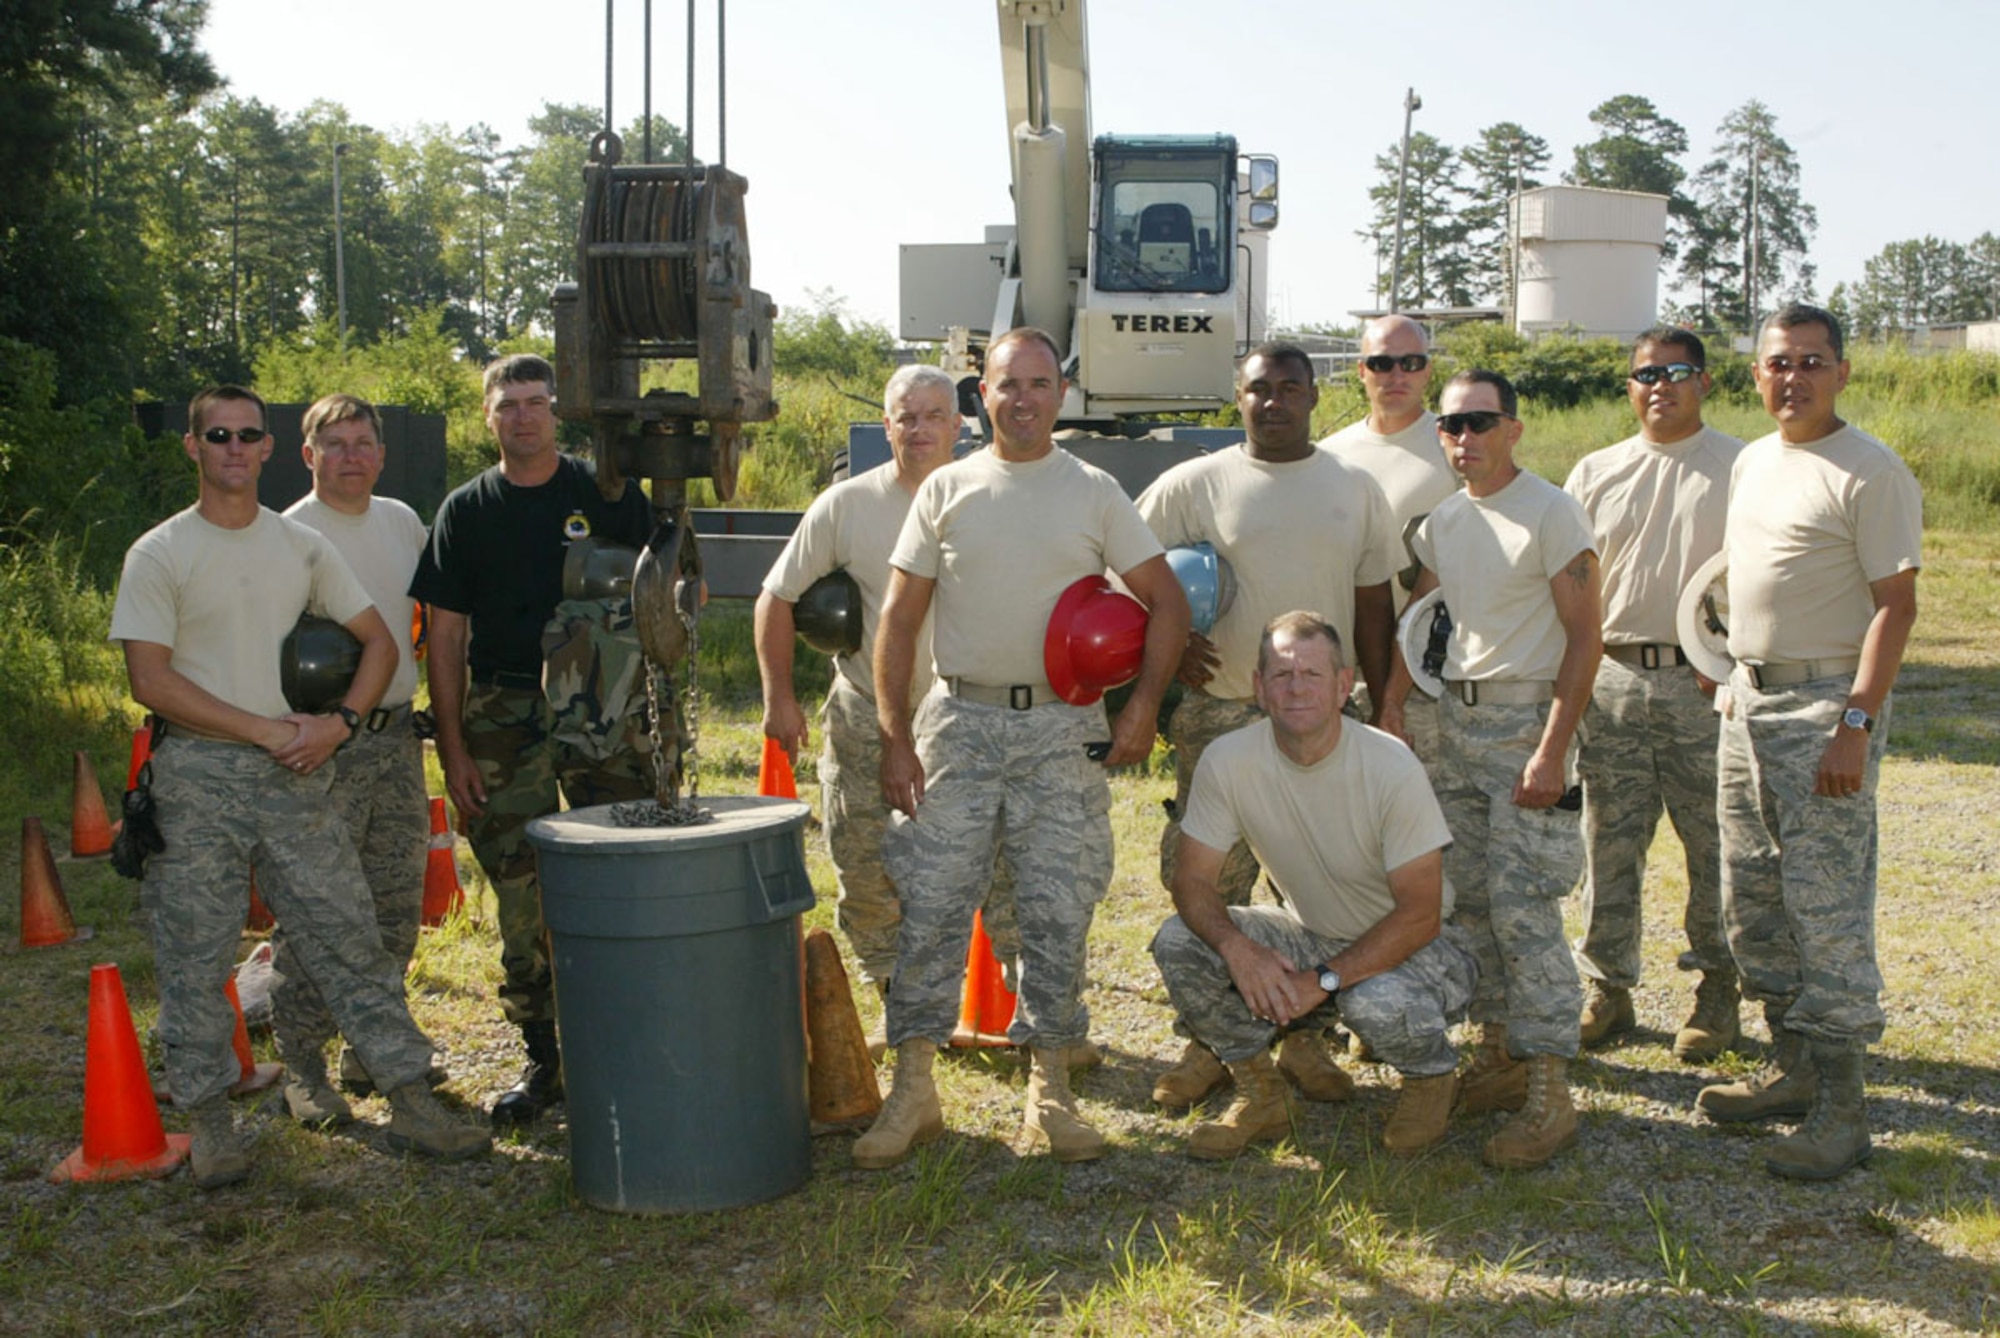 Ten students made up of active duty, Air Force Reserves and Air National Guard personnel successfully completed a one-week extensive crane operations course at the Air Force Reserve Command Expeditionary Combat Support Training Certification Center July 24. The course focus was on proper operations of the heavy equipment with an emphasis on safety and was conducted for those students requiring initial and crane recertification. (U.S. Air Force photo/Don Peek)